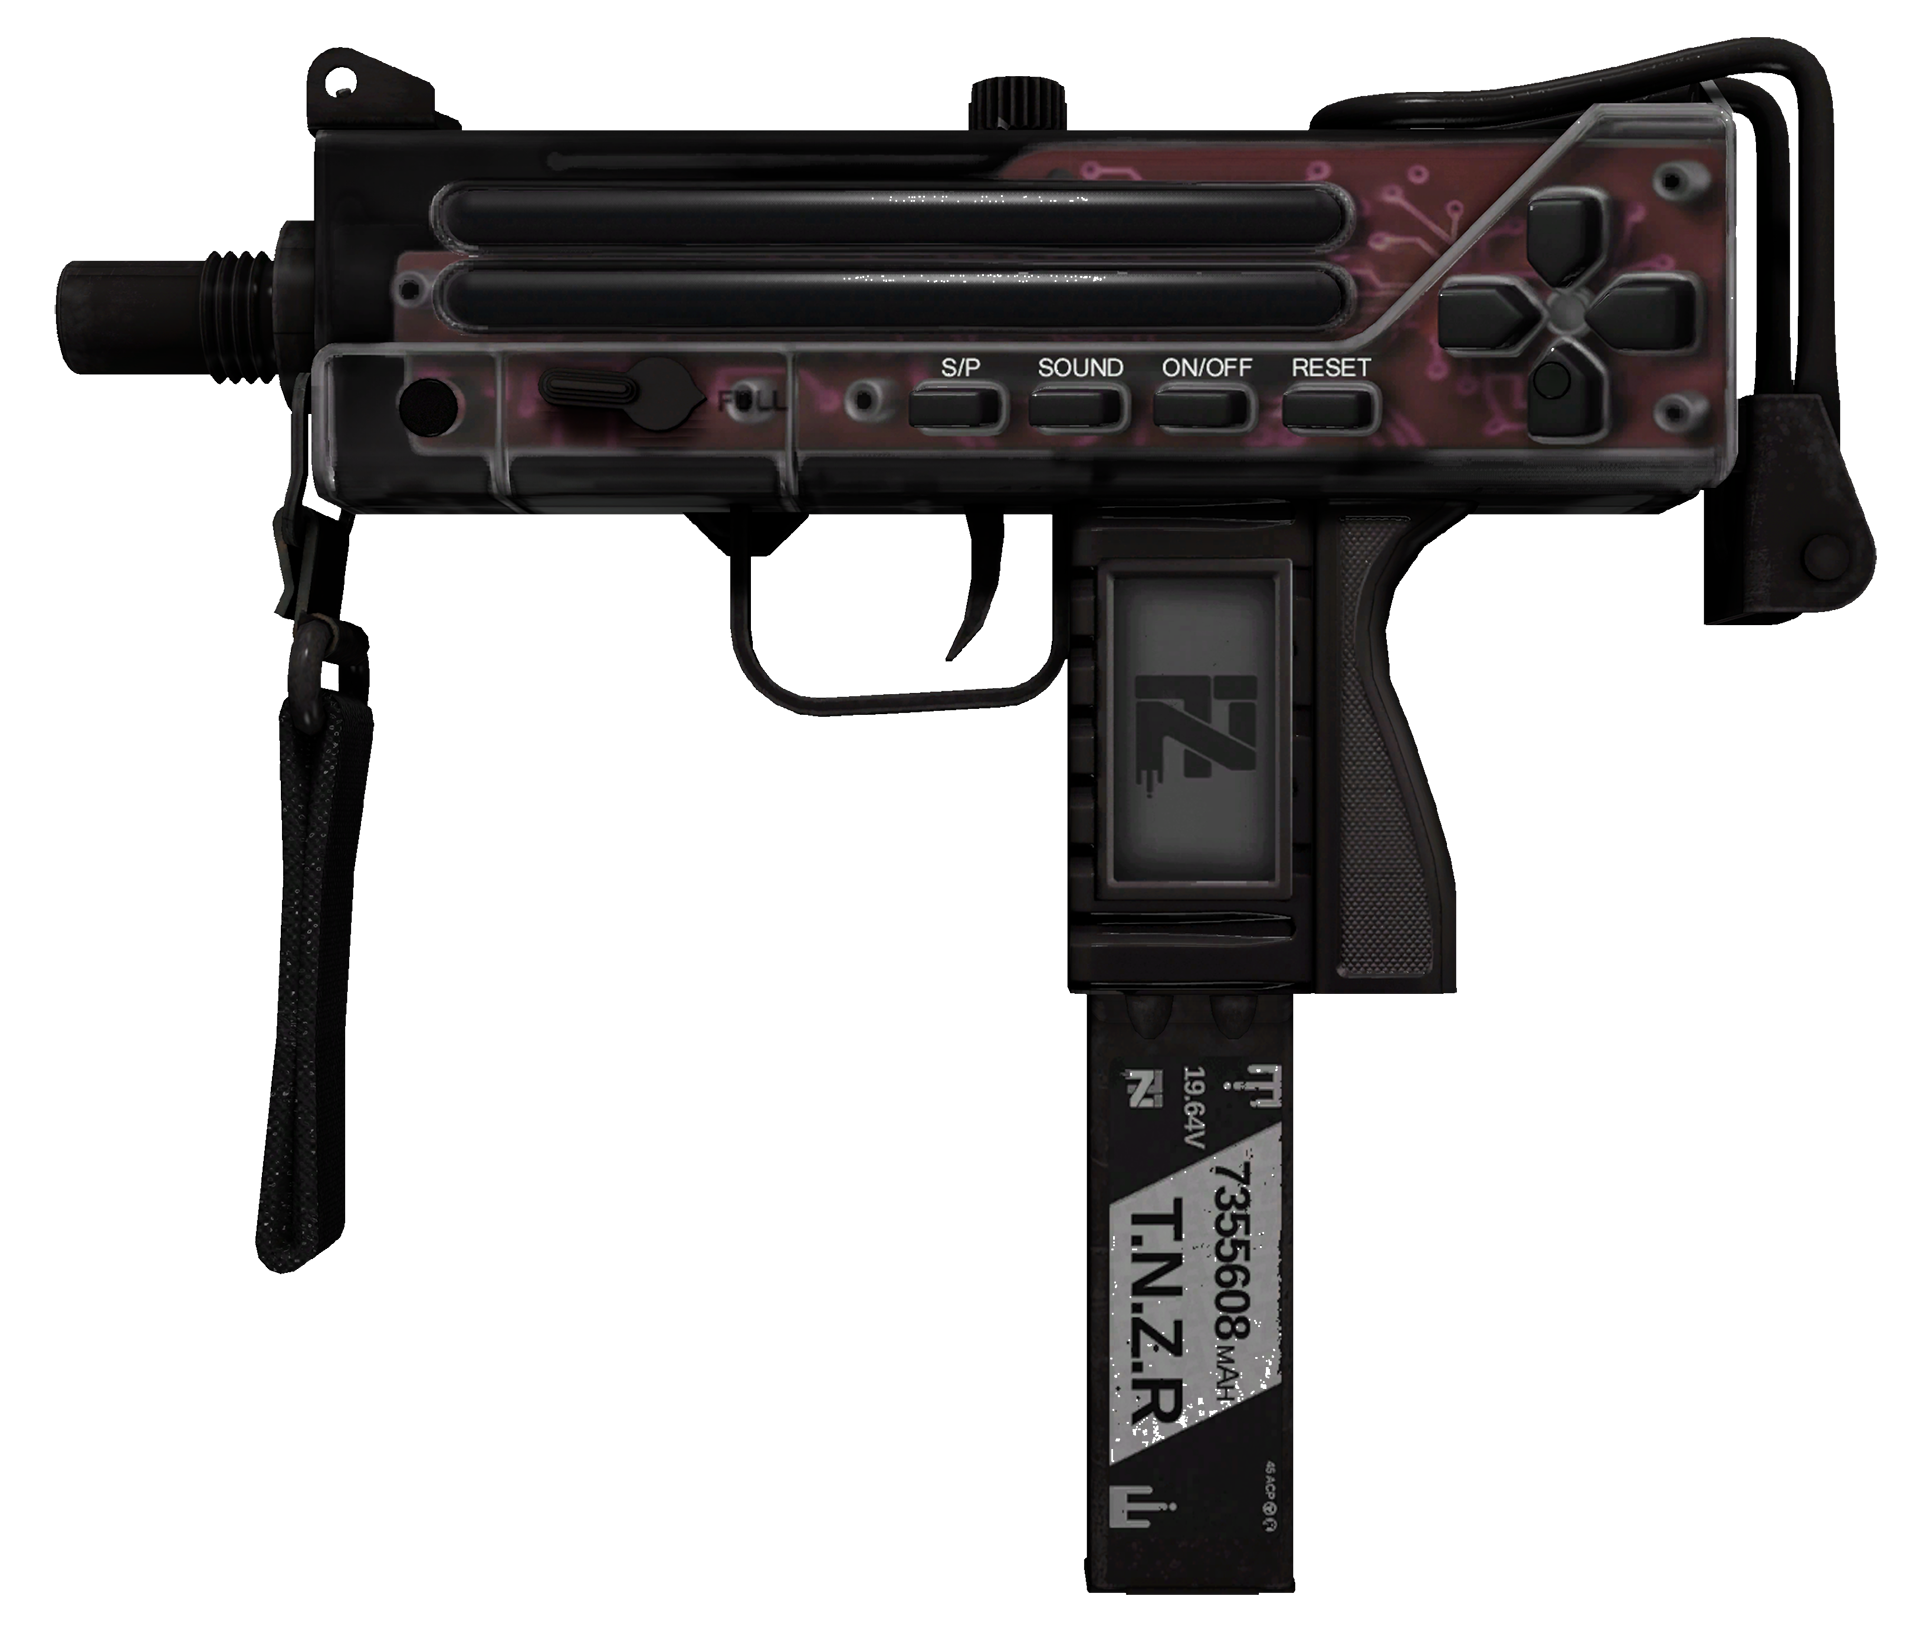 MAC-10 Button Masher cs go skin download the new version for windows